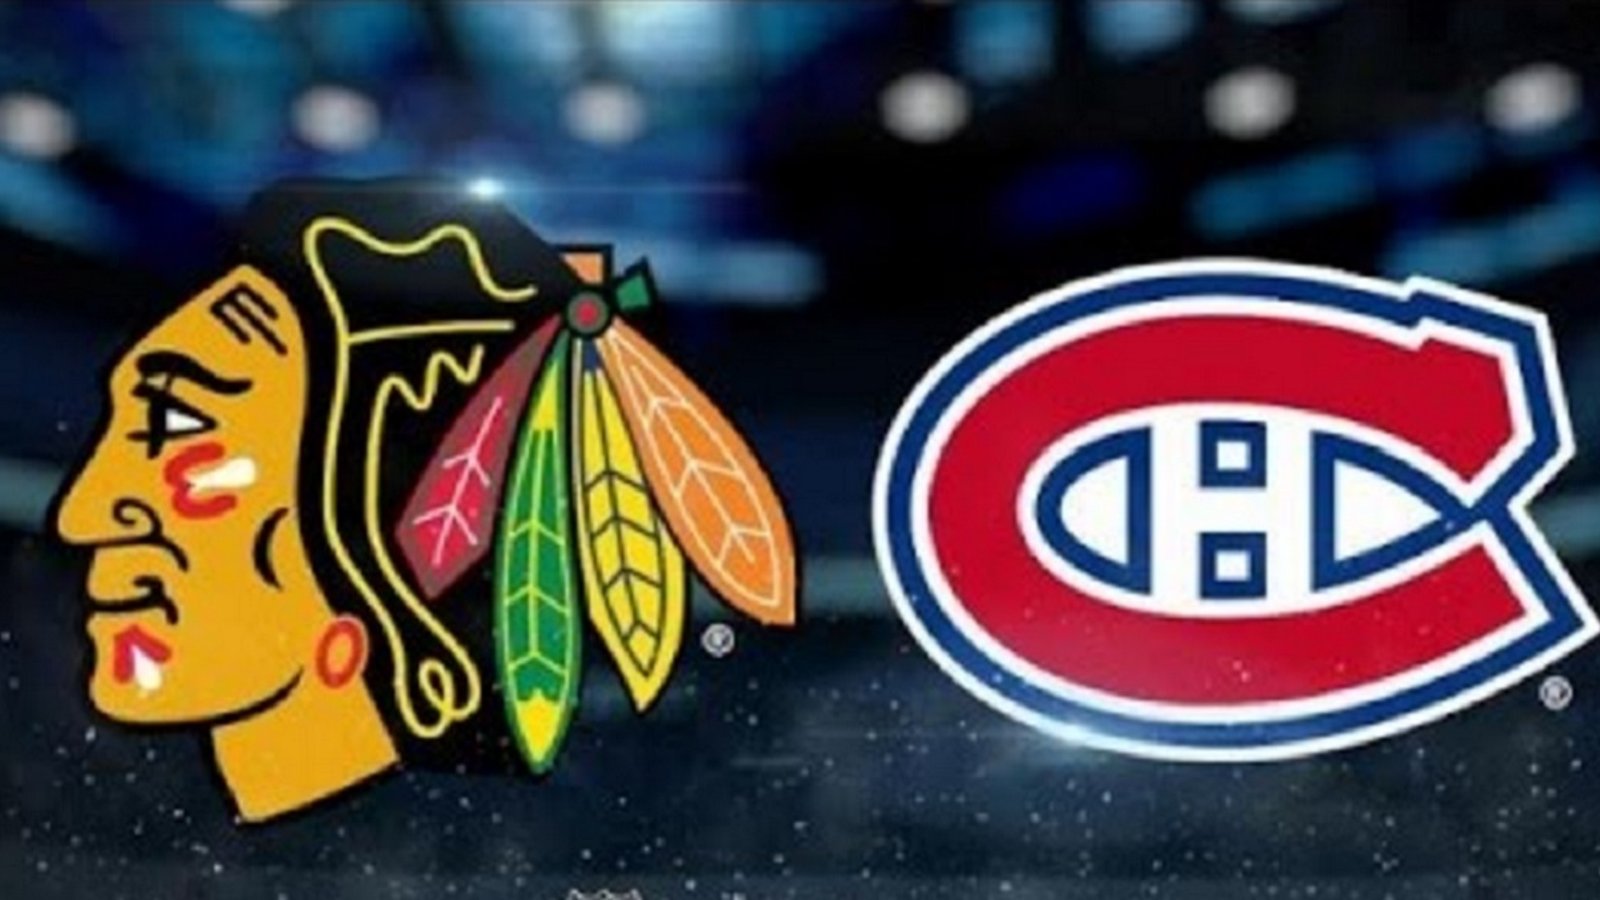 Rumored trade between the Blackhawks and Canadiens.